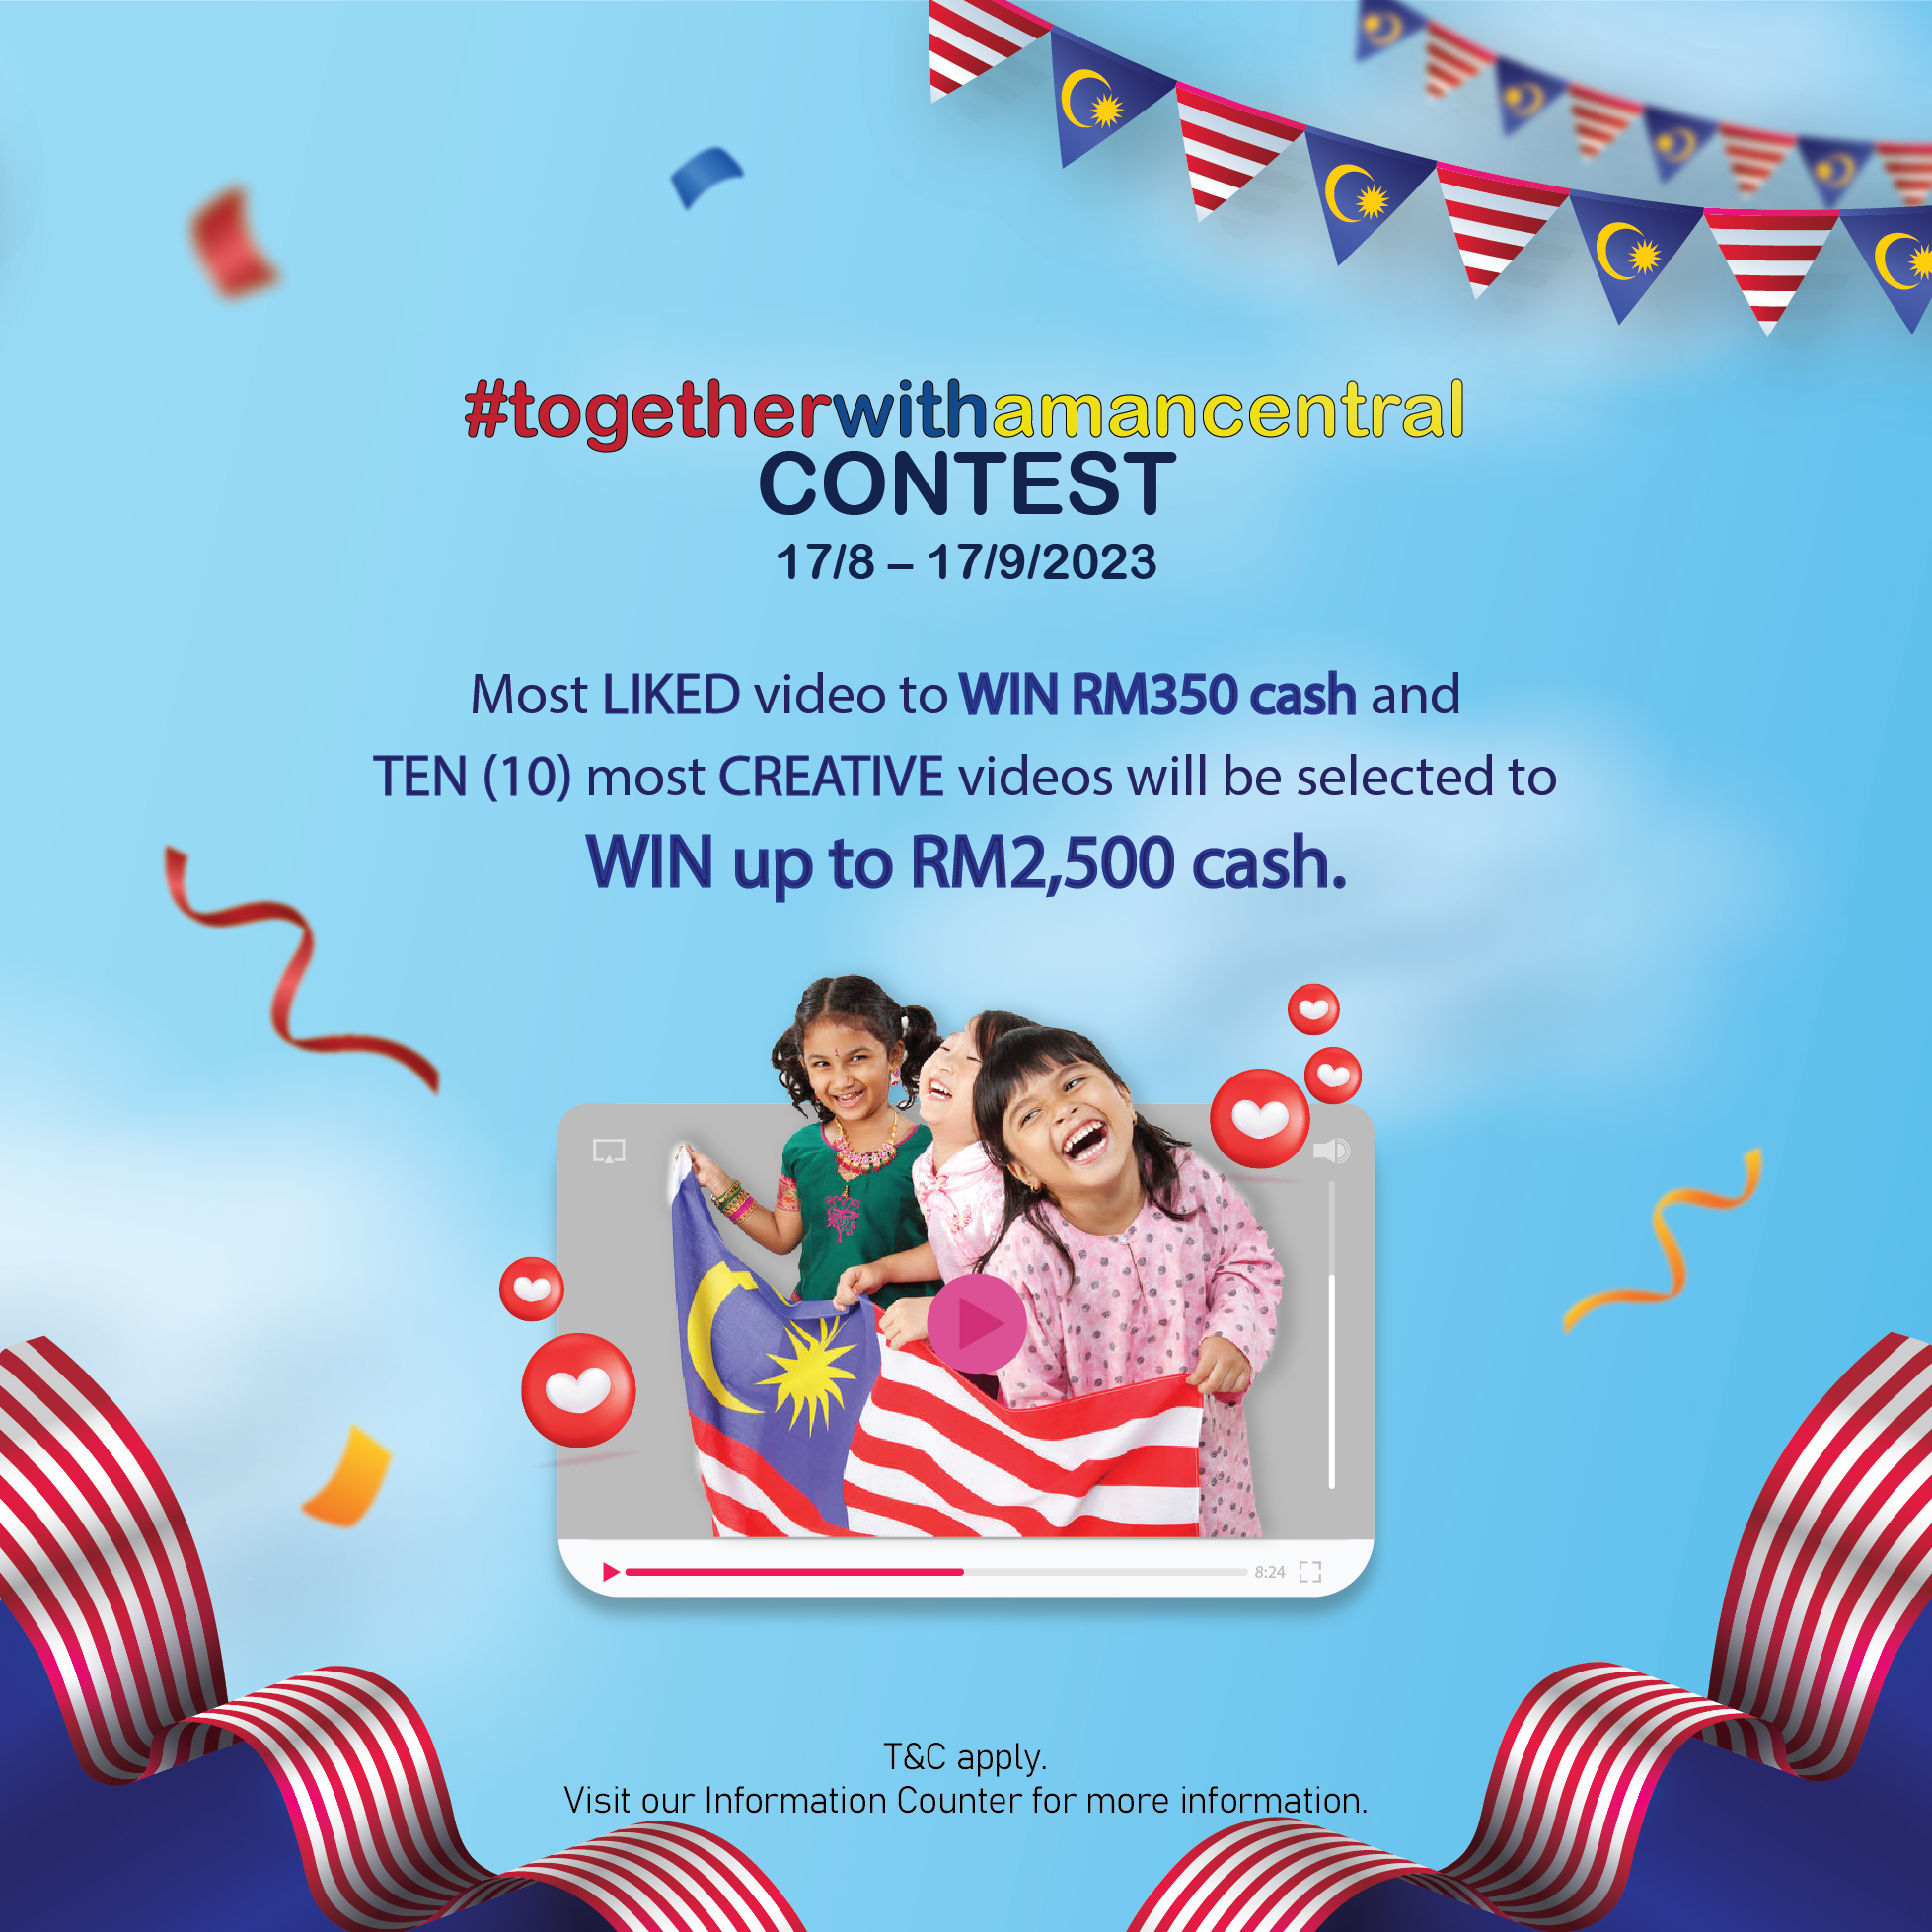 #togetherwithamancentral CONTEST | Aman Central